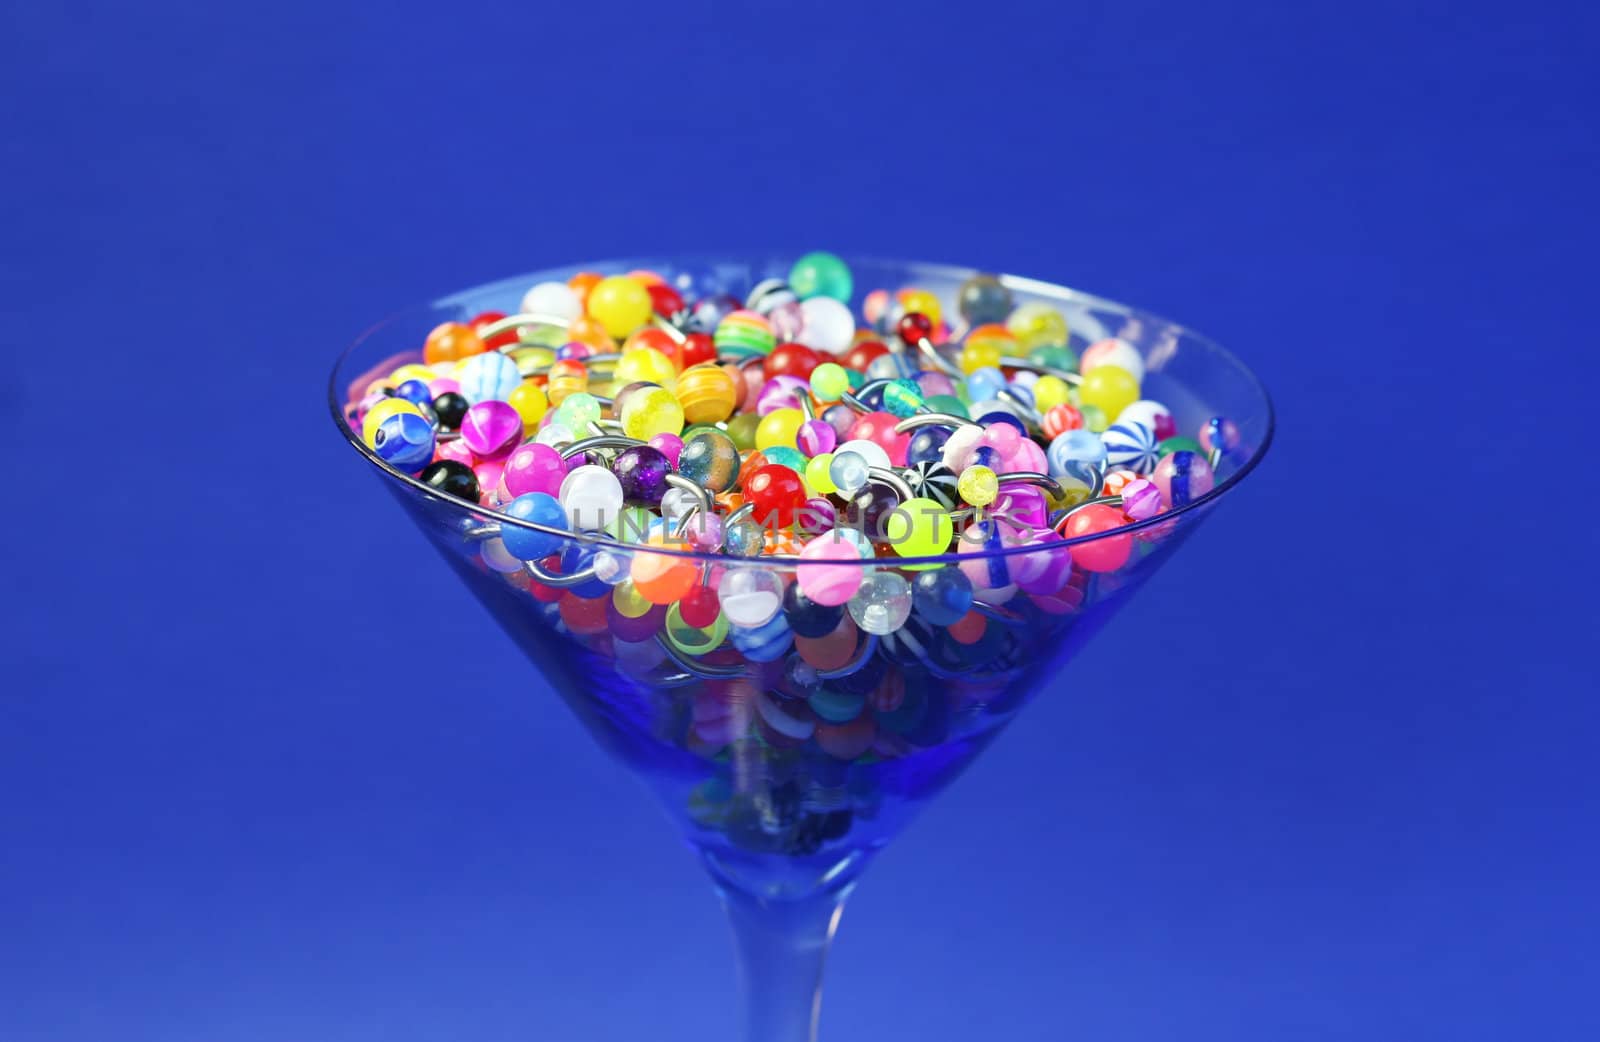 A martini glass full of navel rings. On Saturated Blue Background